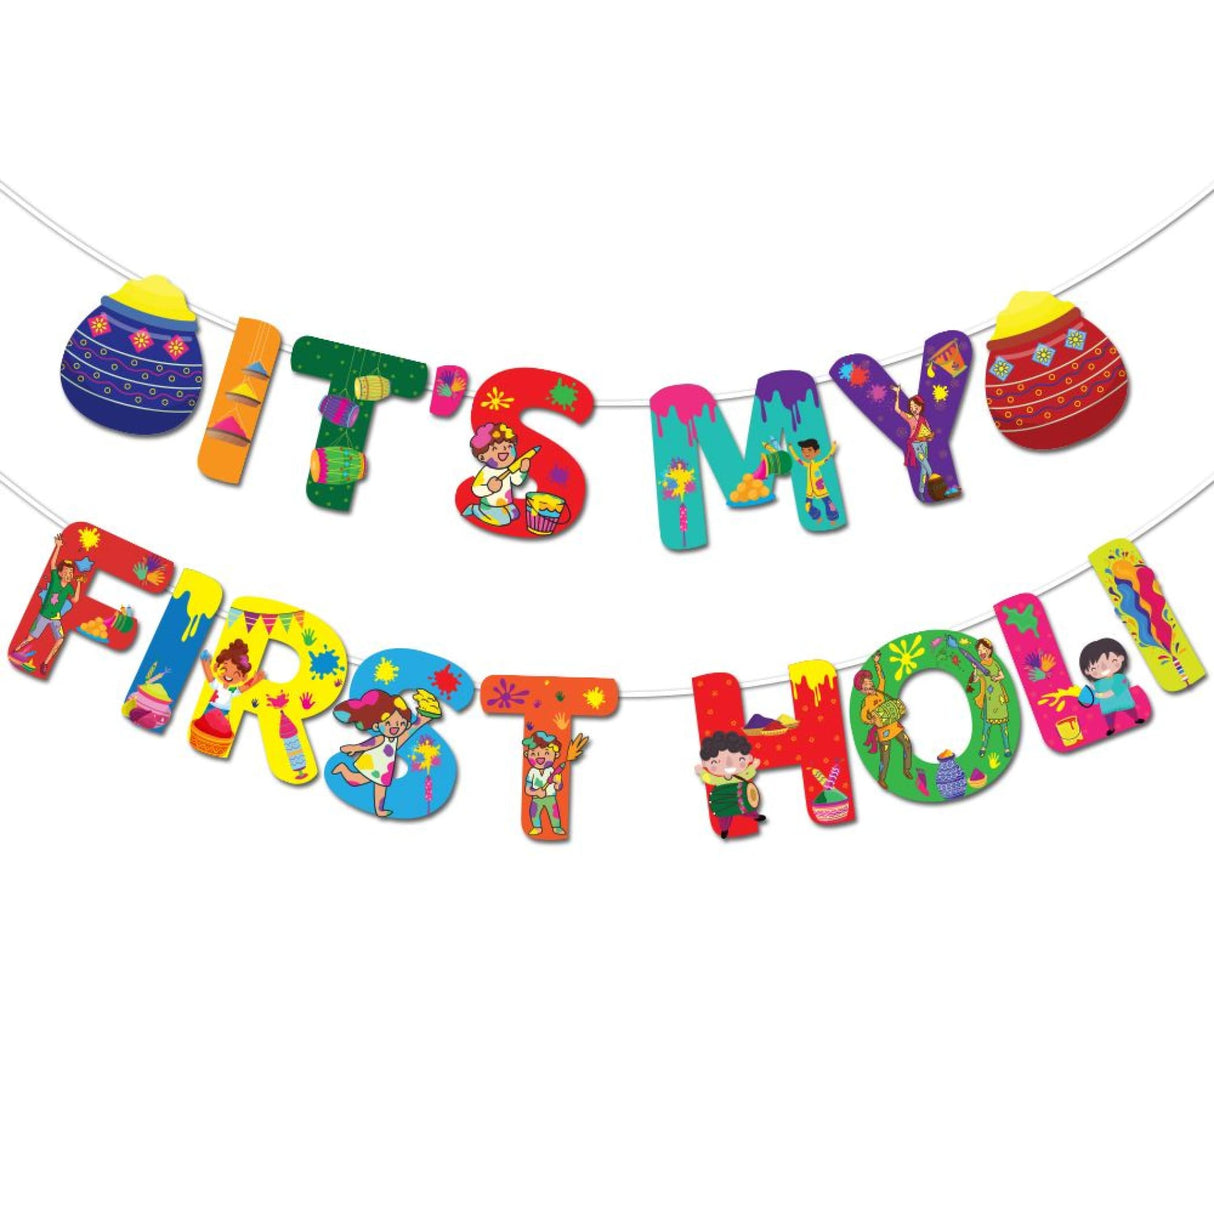 It’s my first holi banners indian festival colorful